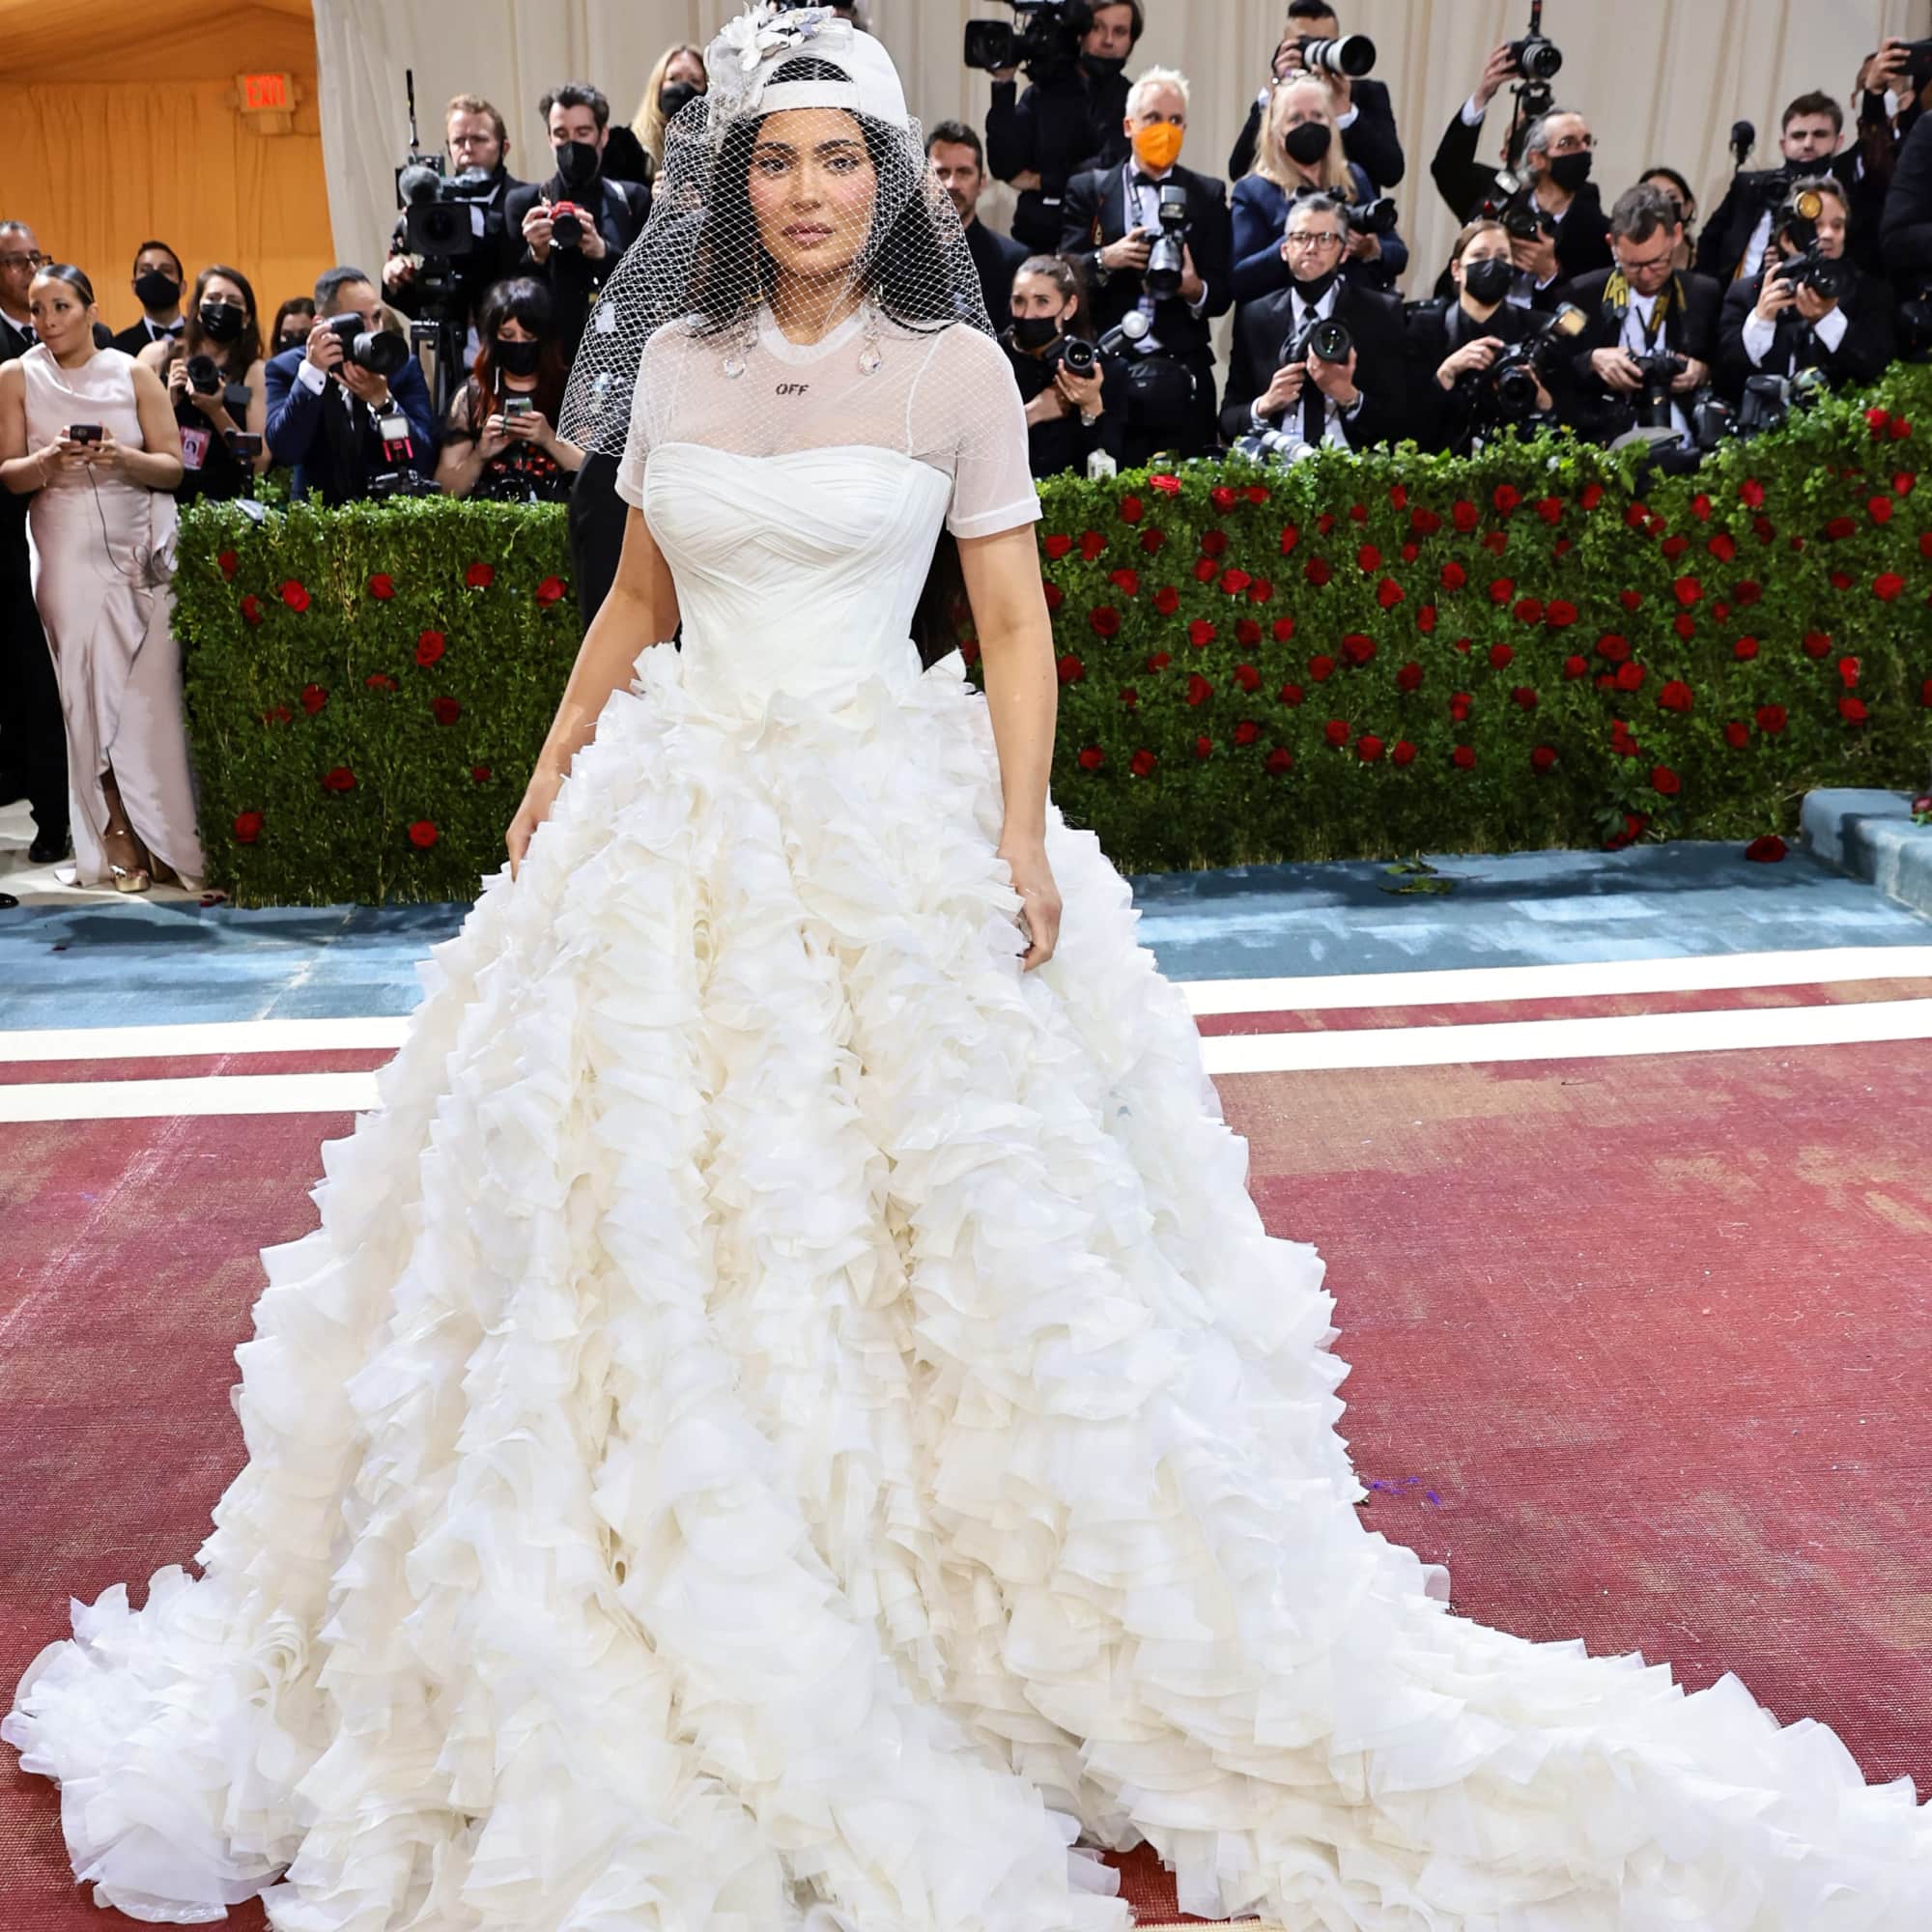 Kylie Jenner Wore a Wedding Dress to the Met Gala, and Twitter Is ...